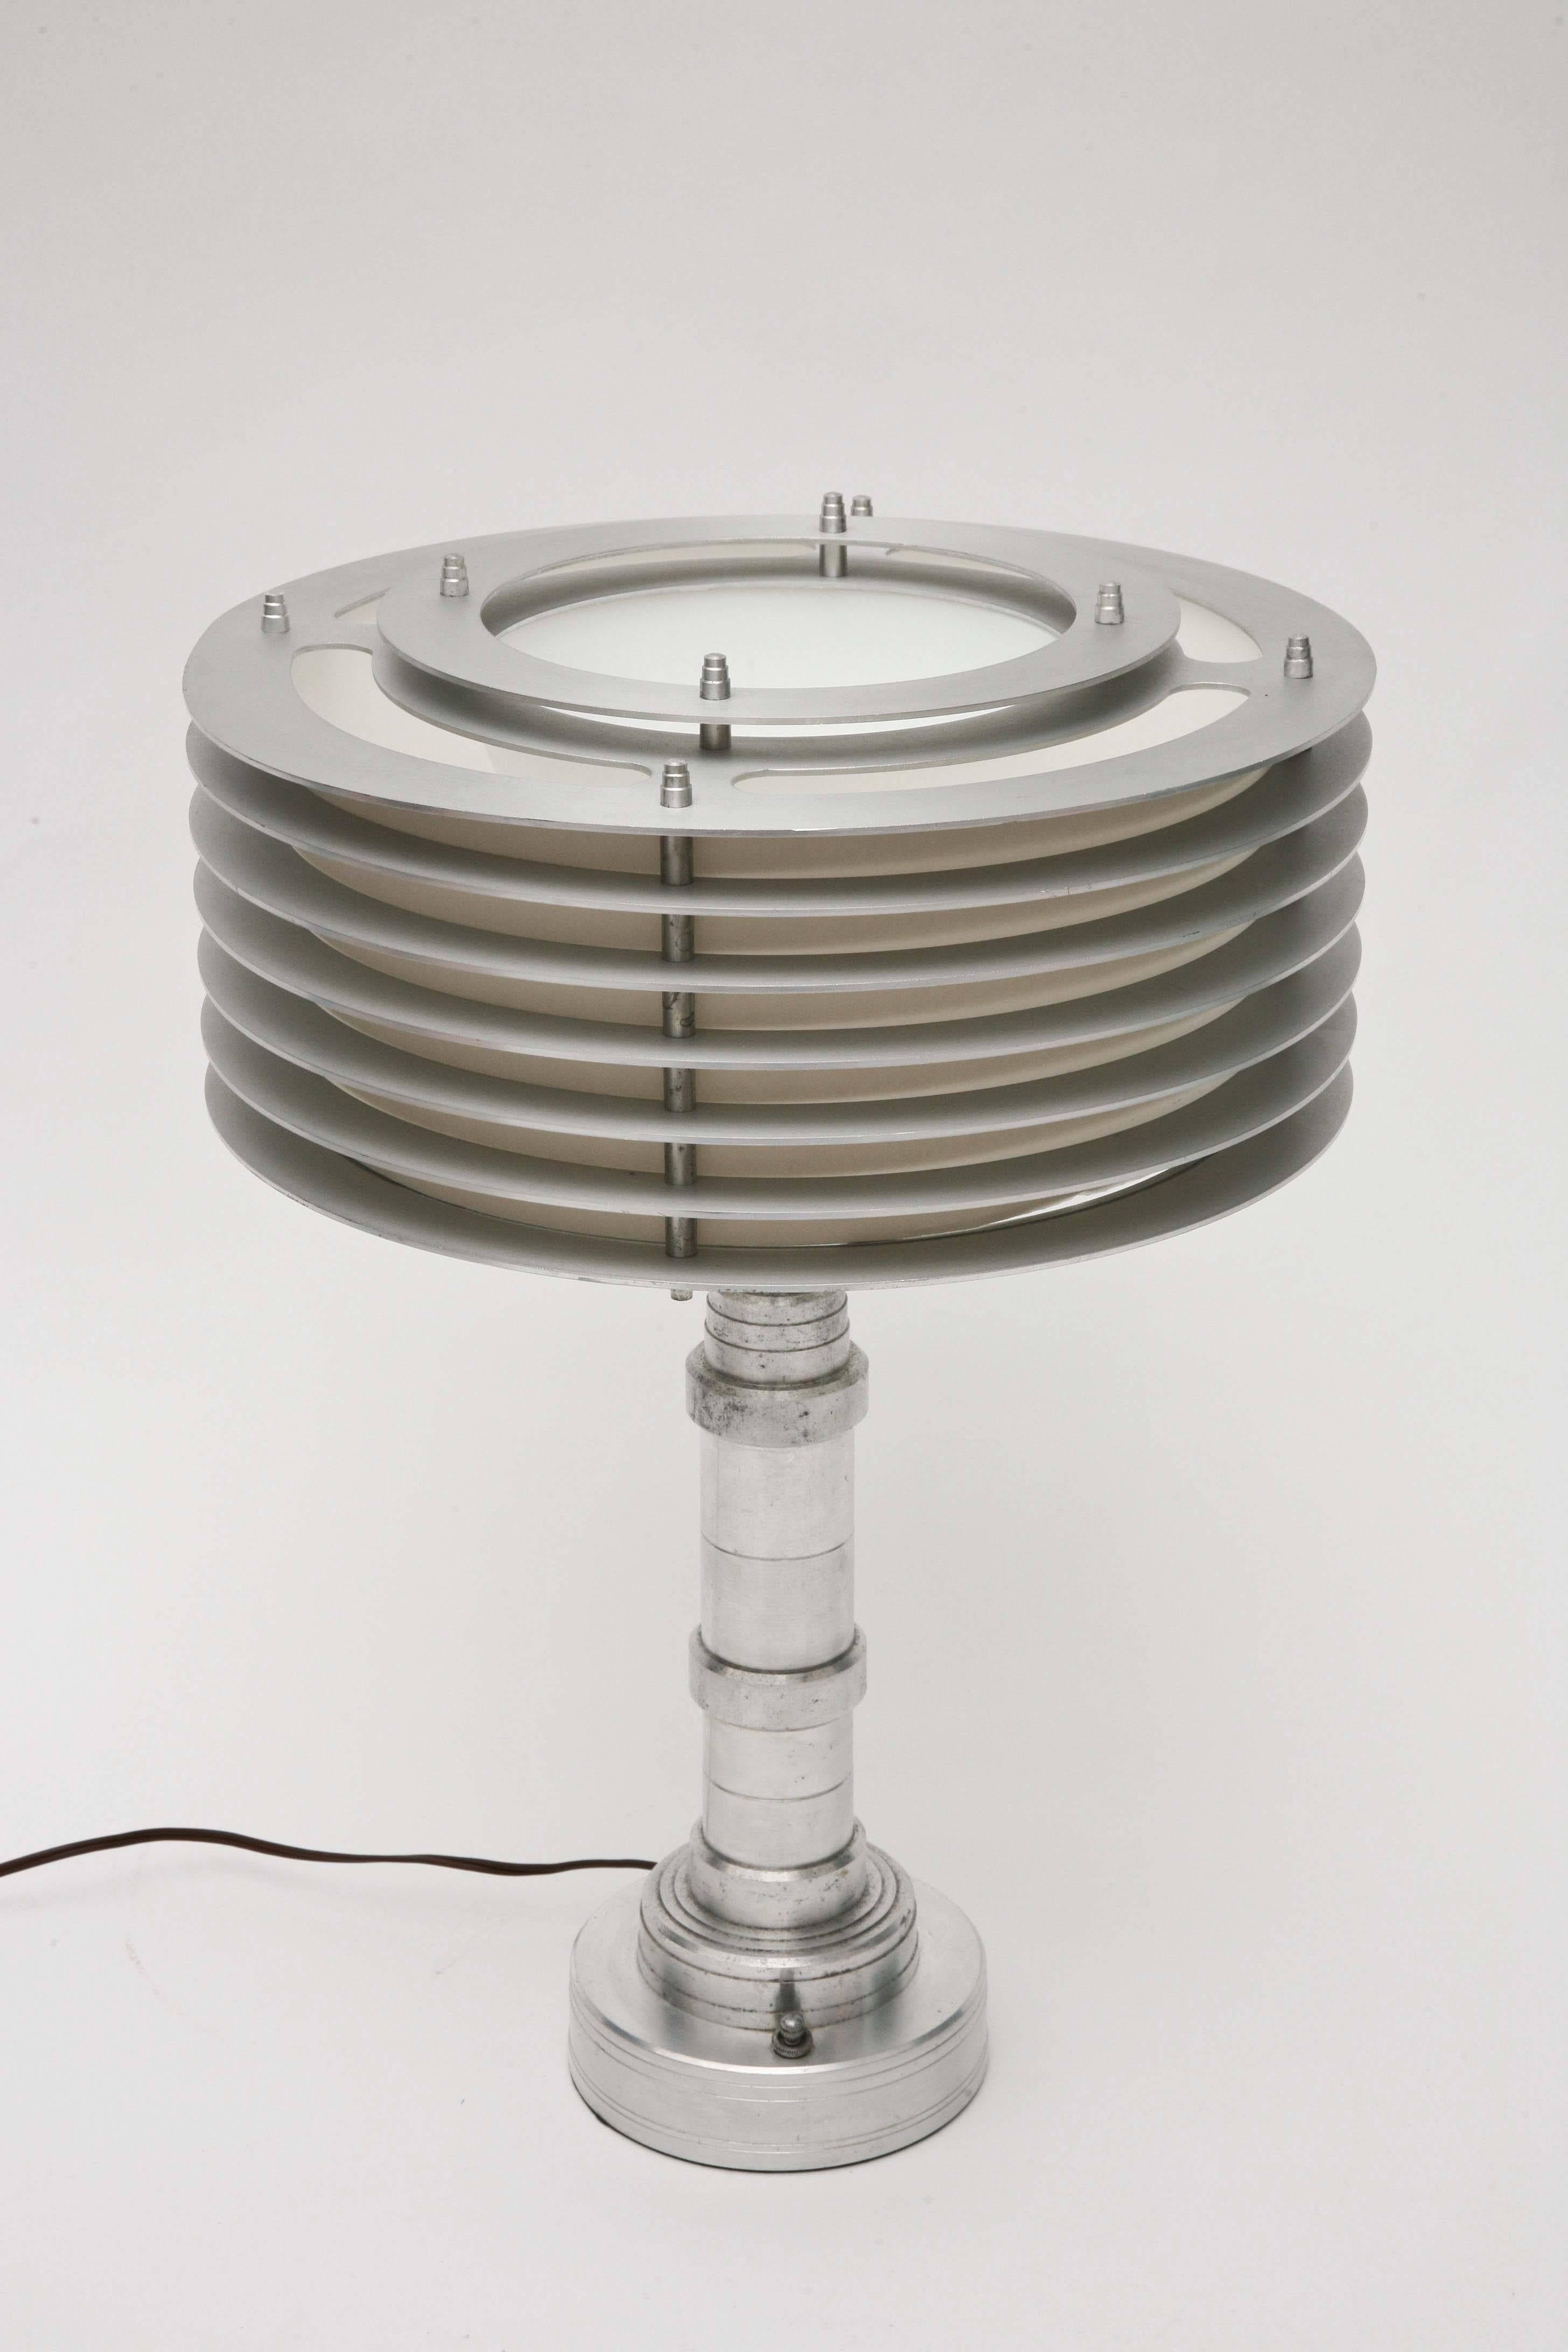 Classic machine age table lamp manufactured by Pattyn products.